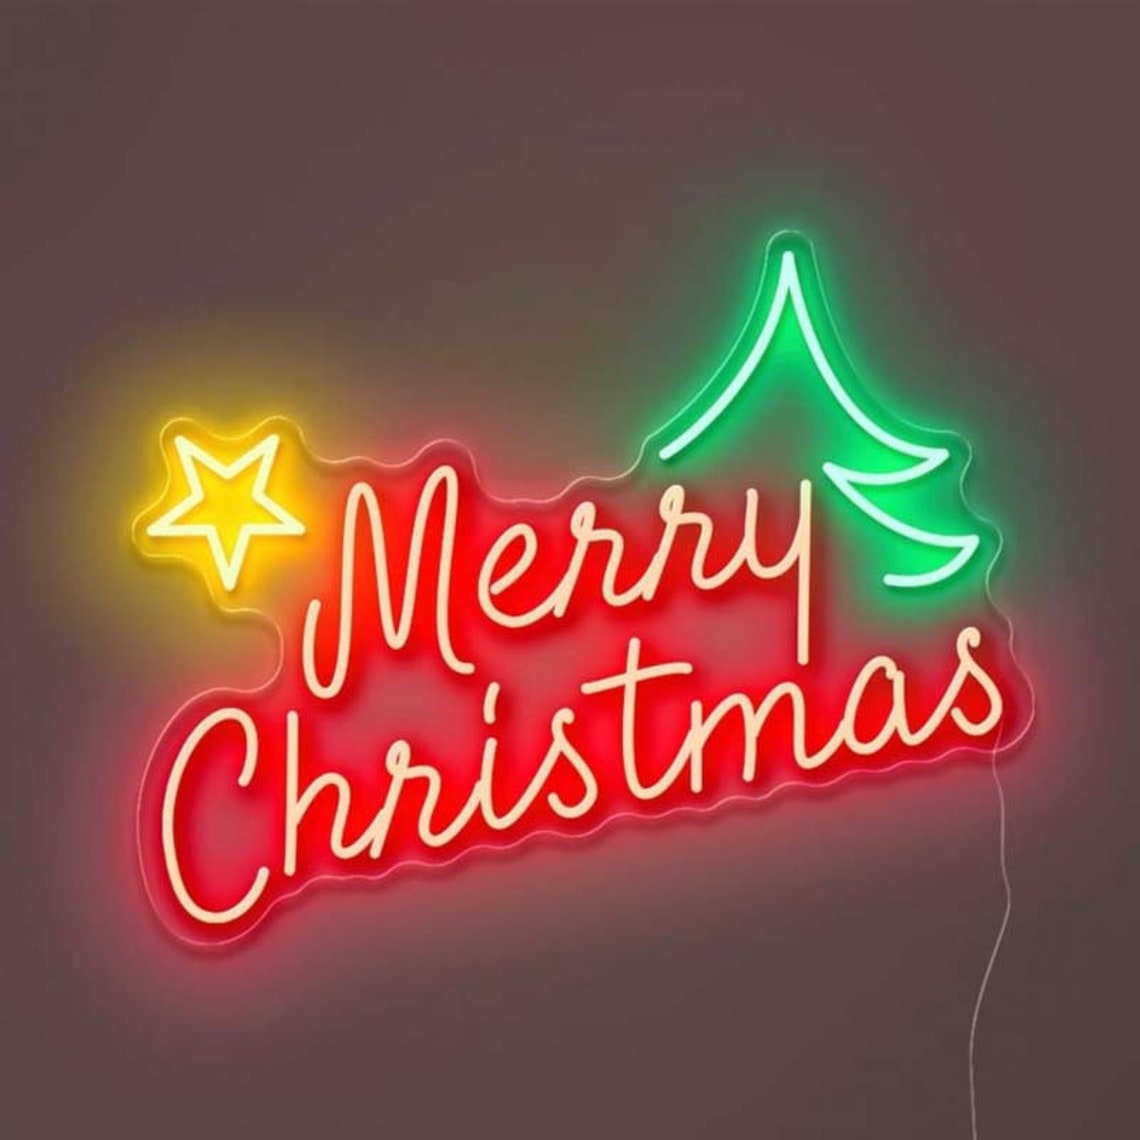 Merry Christmas Xmas ,Led Sign for Christmas Eve Home Bar Wall Decoration,Neon Sign Bedroom,Neon Lights,Party Decor